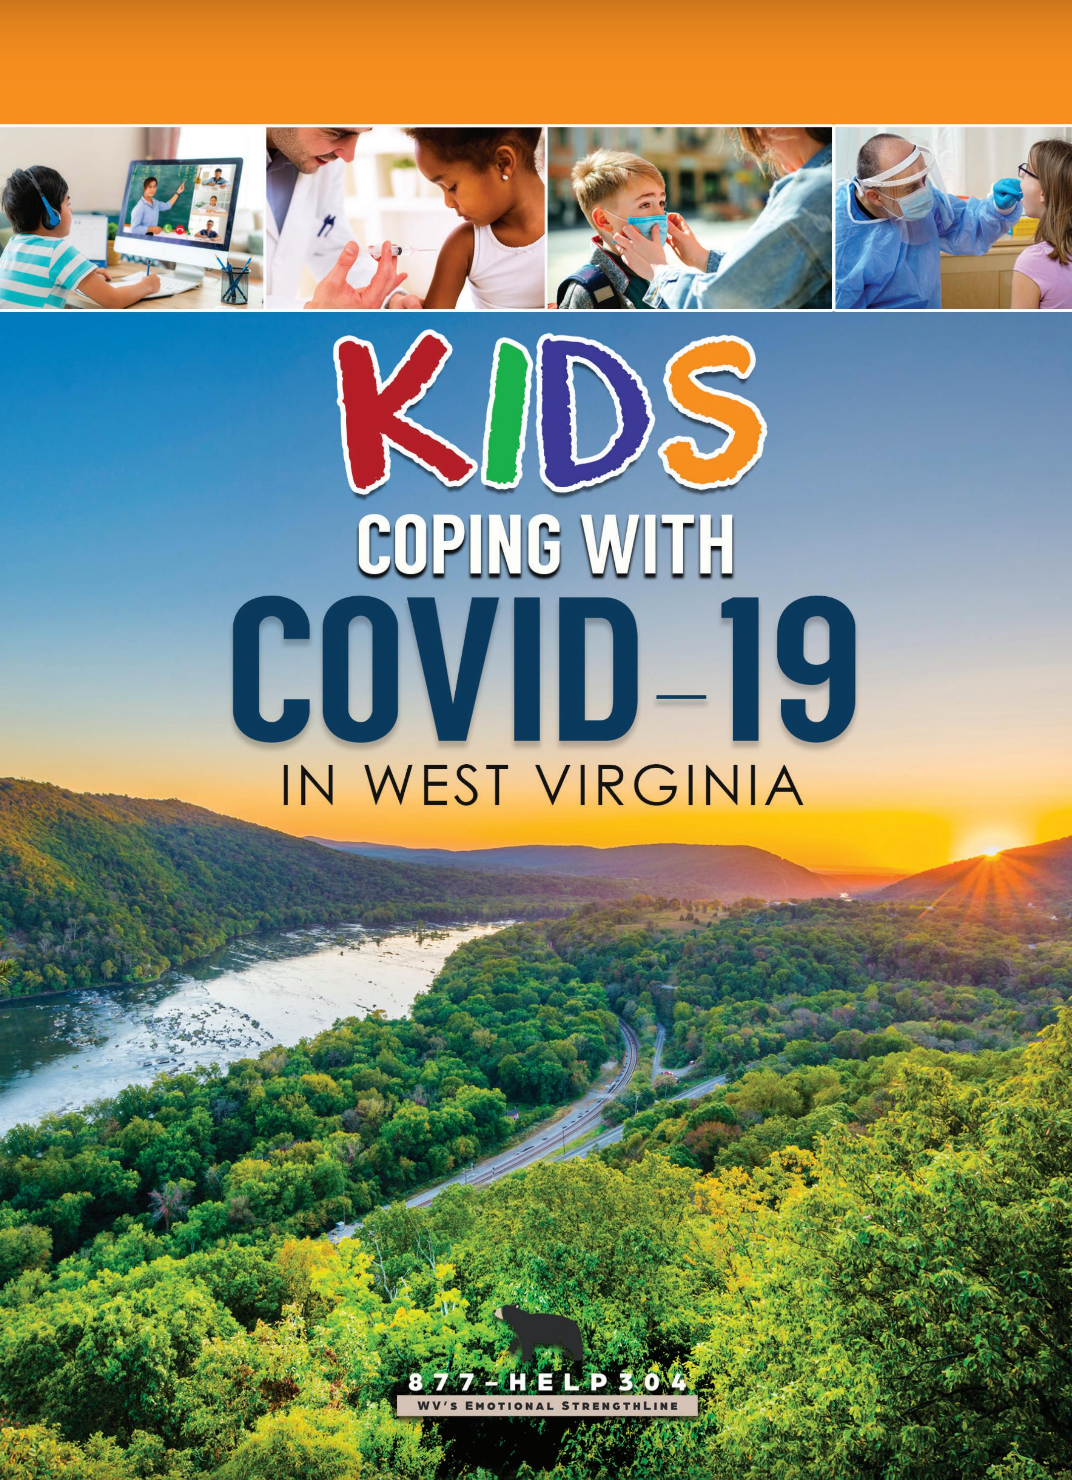 Kids Coping with COVID-19 in West Virginia